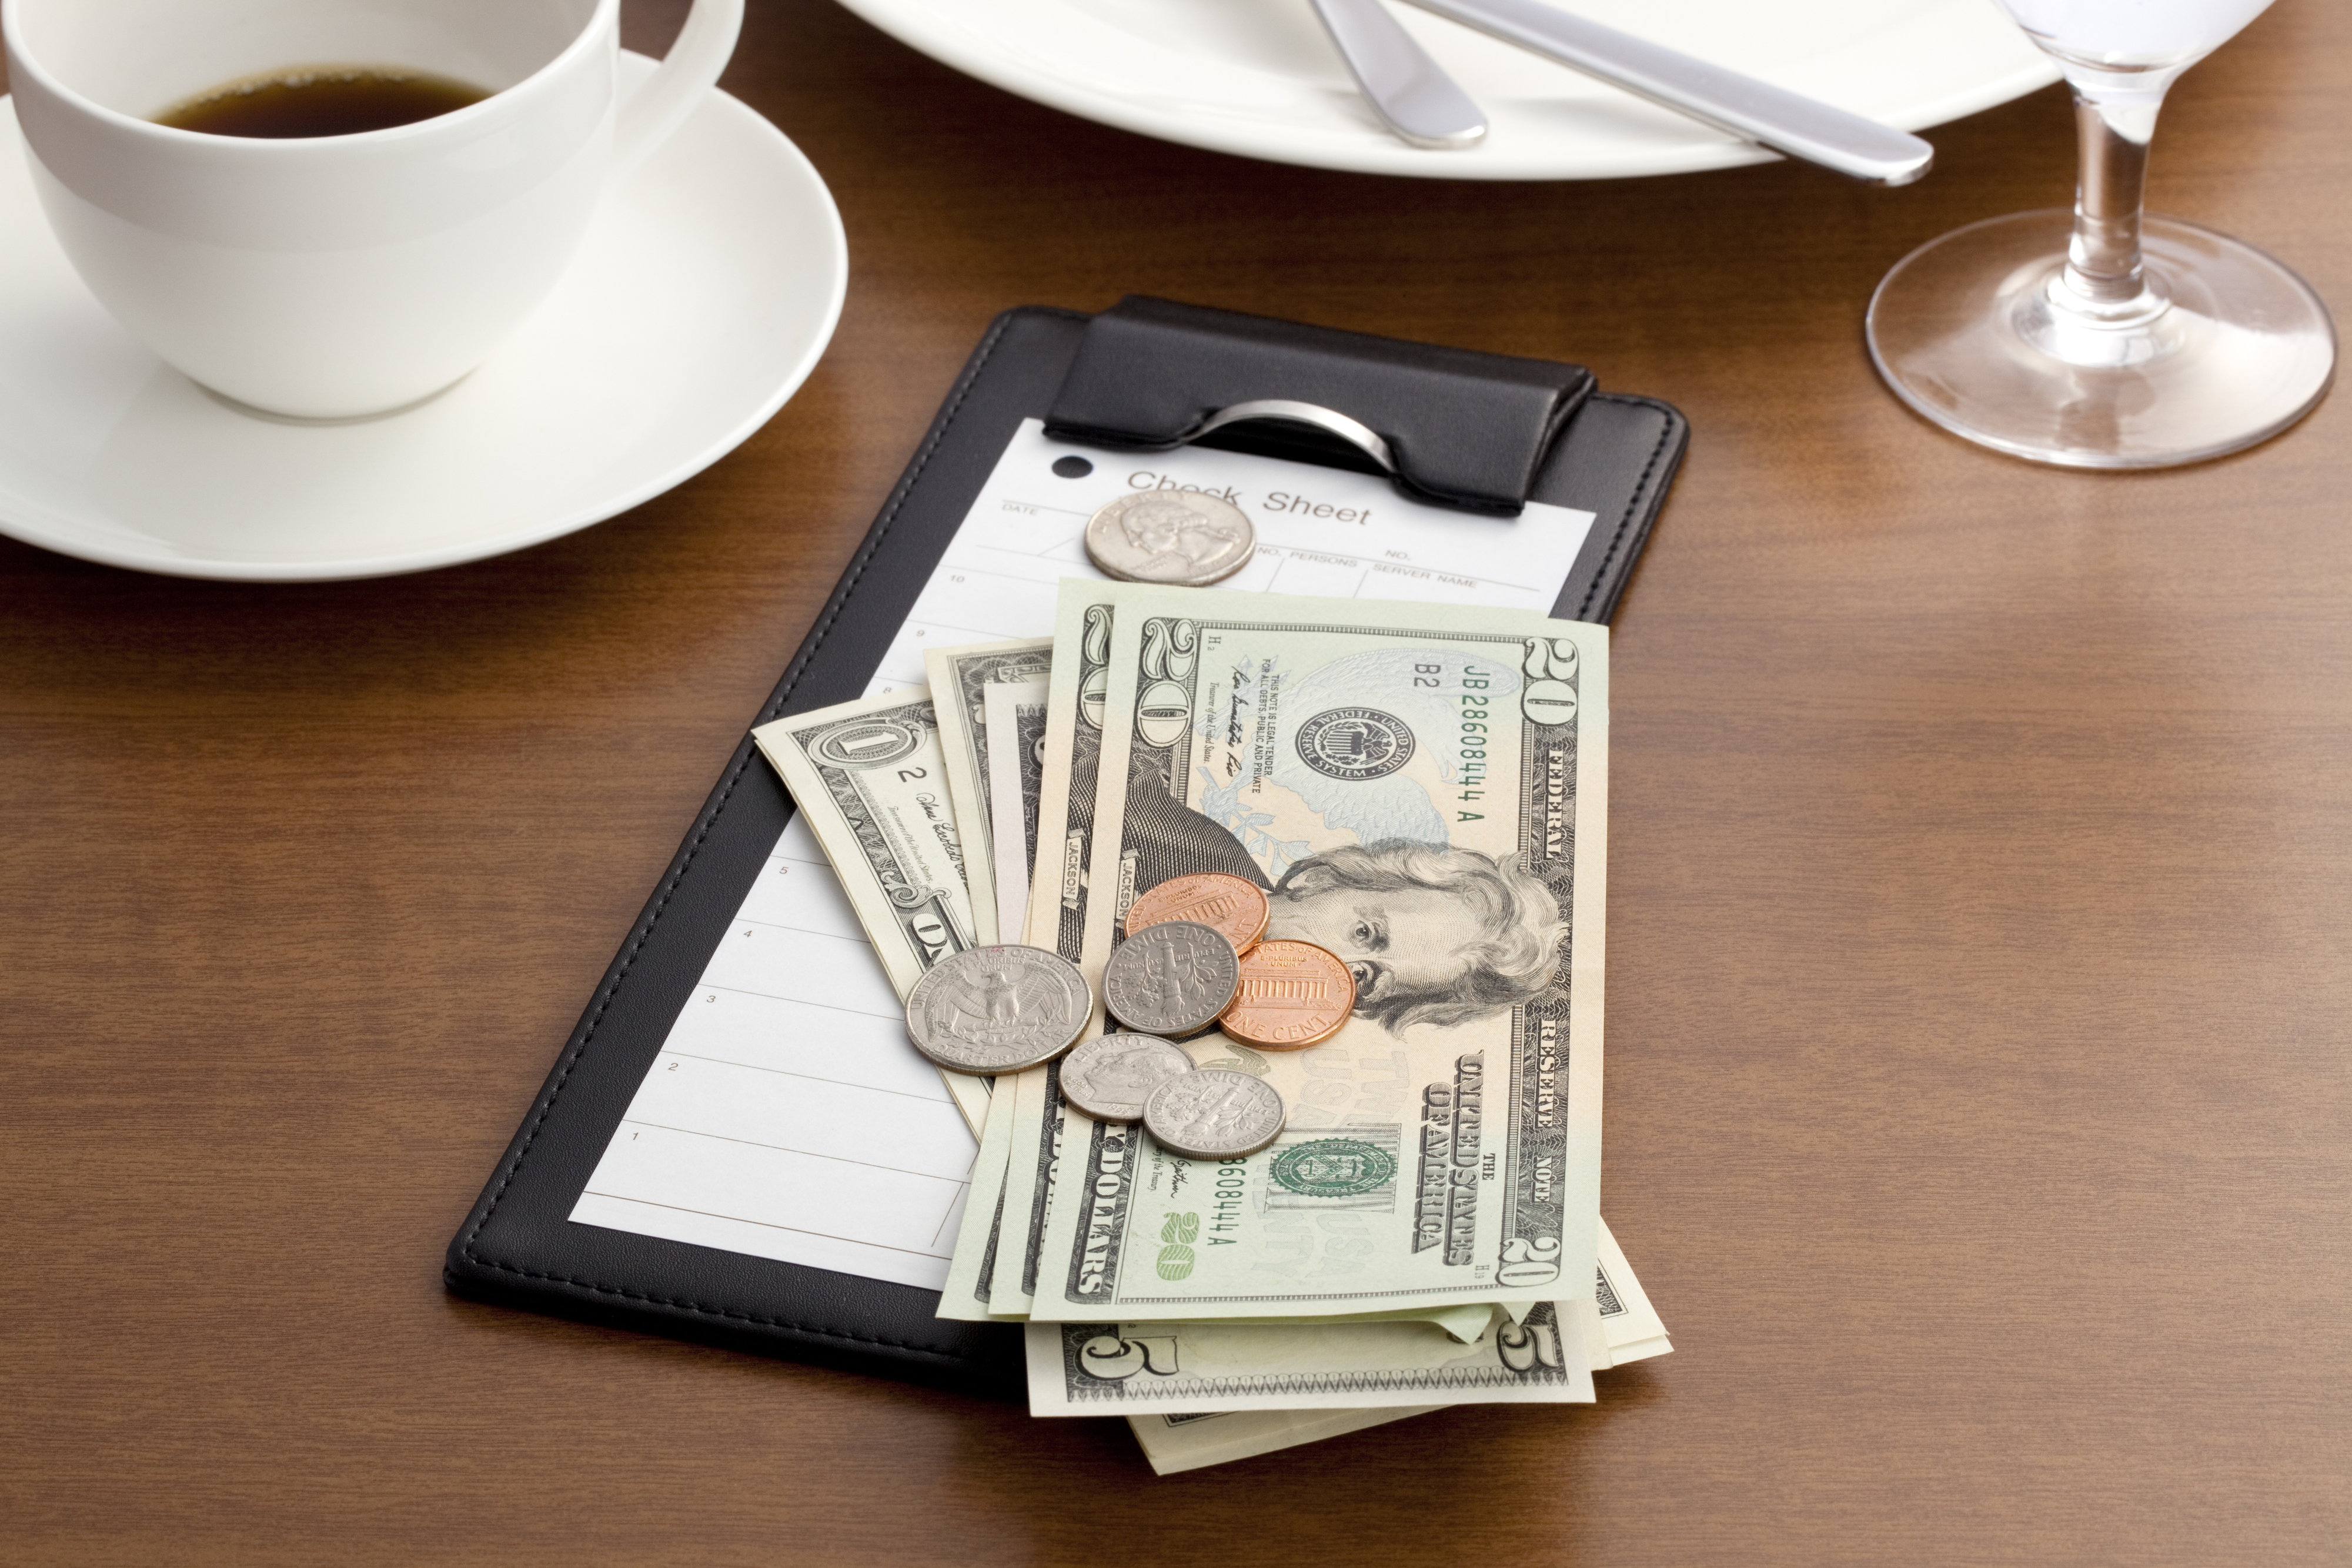 A check sheet, various U.S. dollar bills, and coins are placed on a black check holder on a table next to a cup of coffee and a wine glass